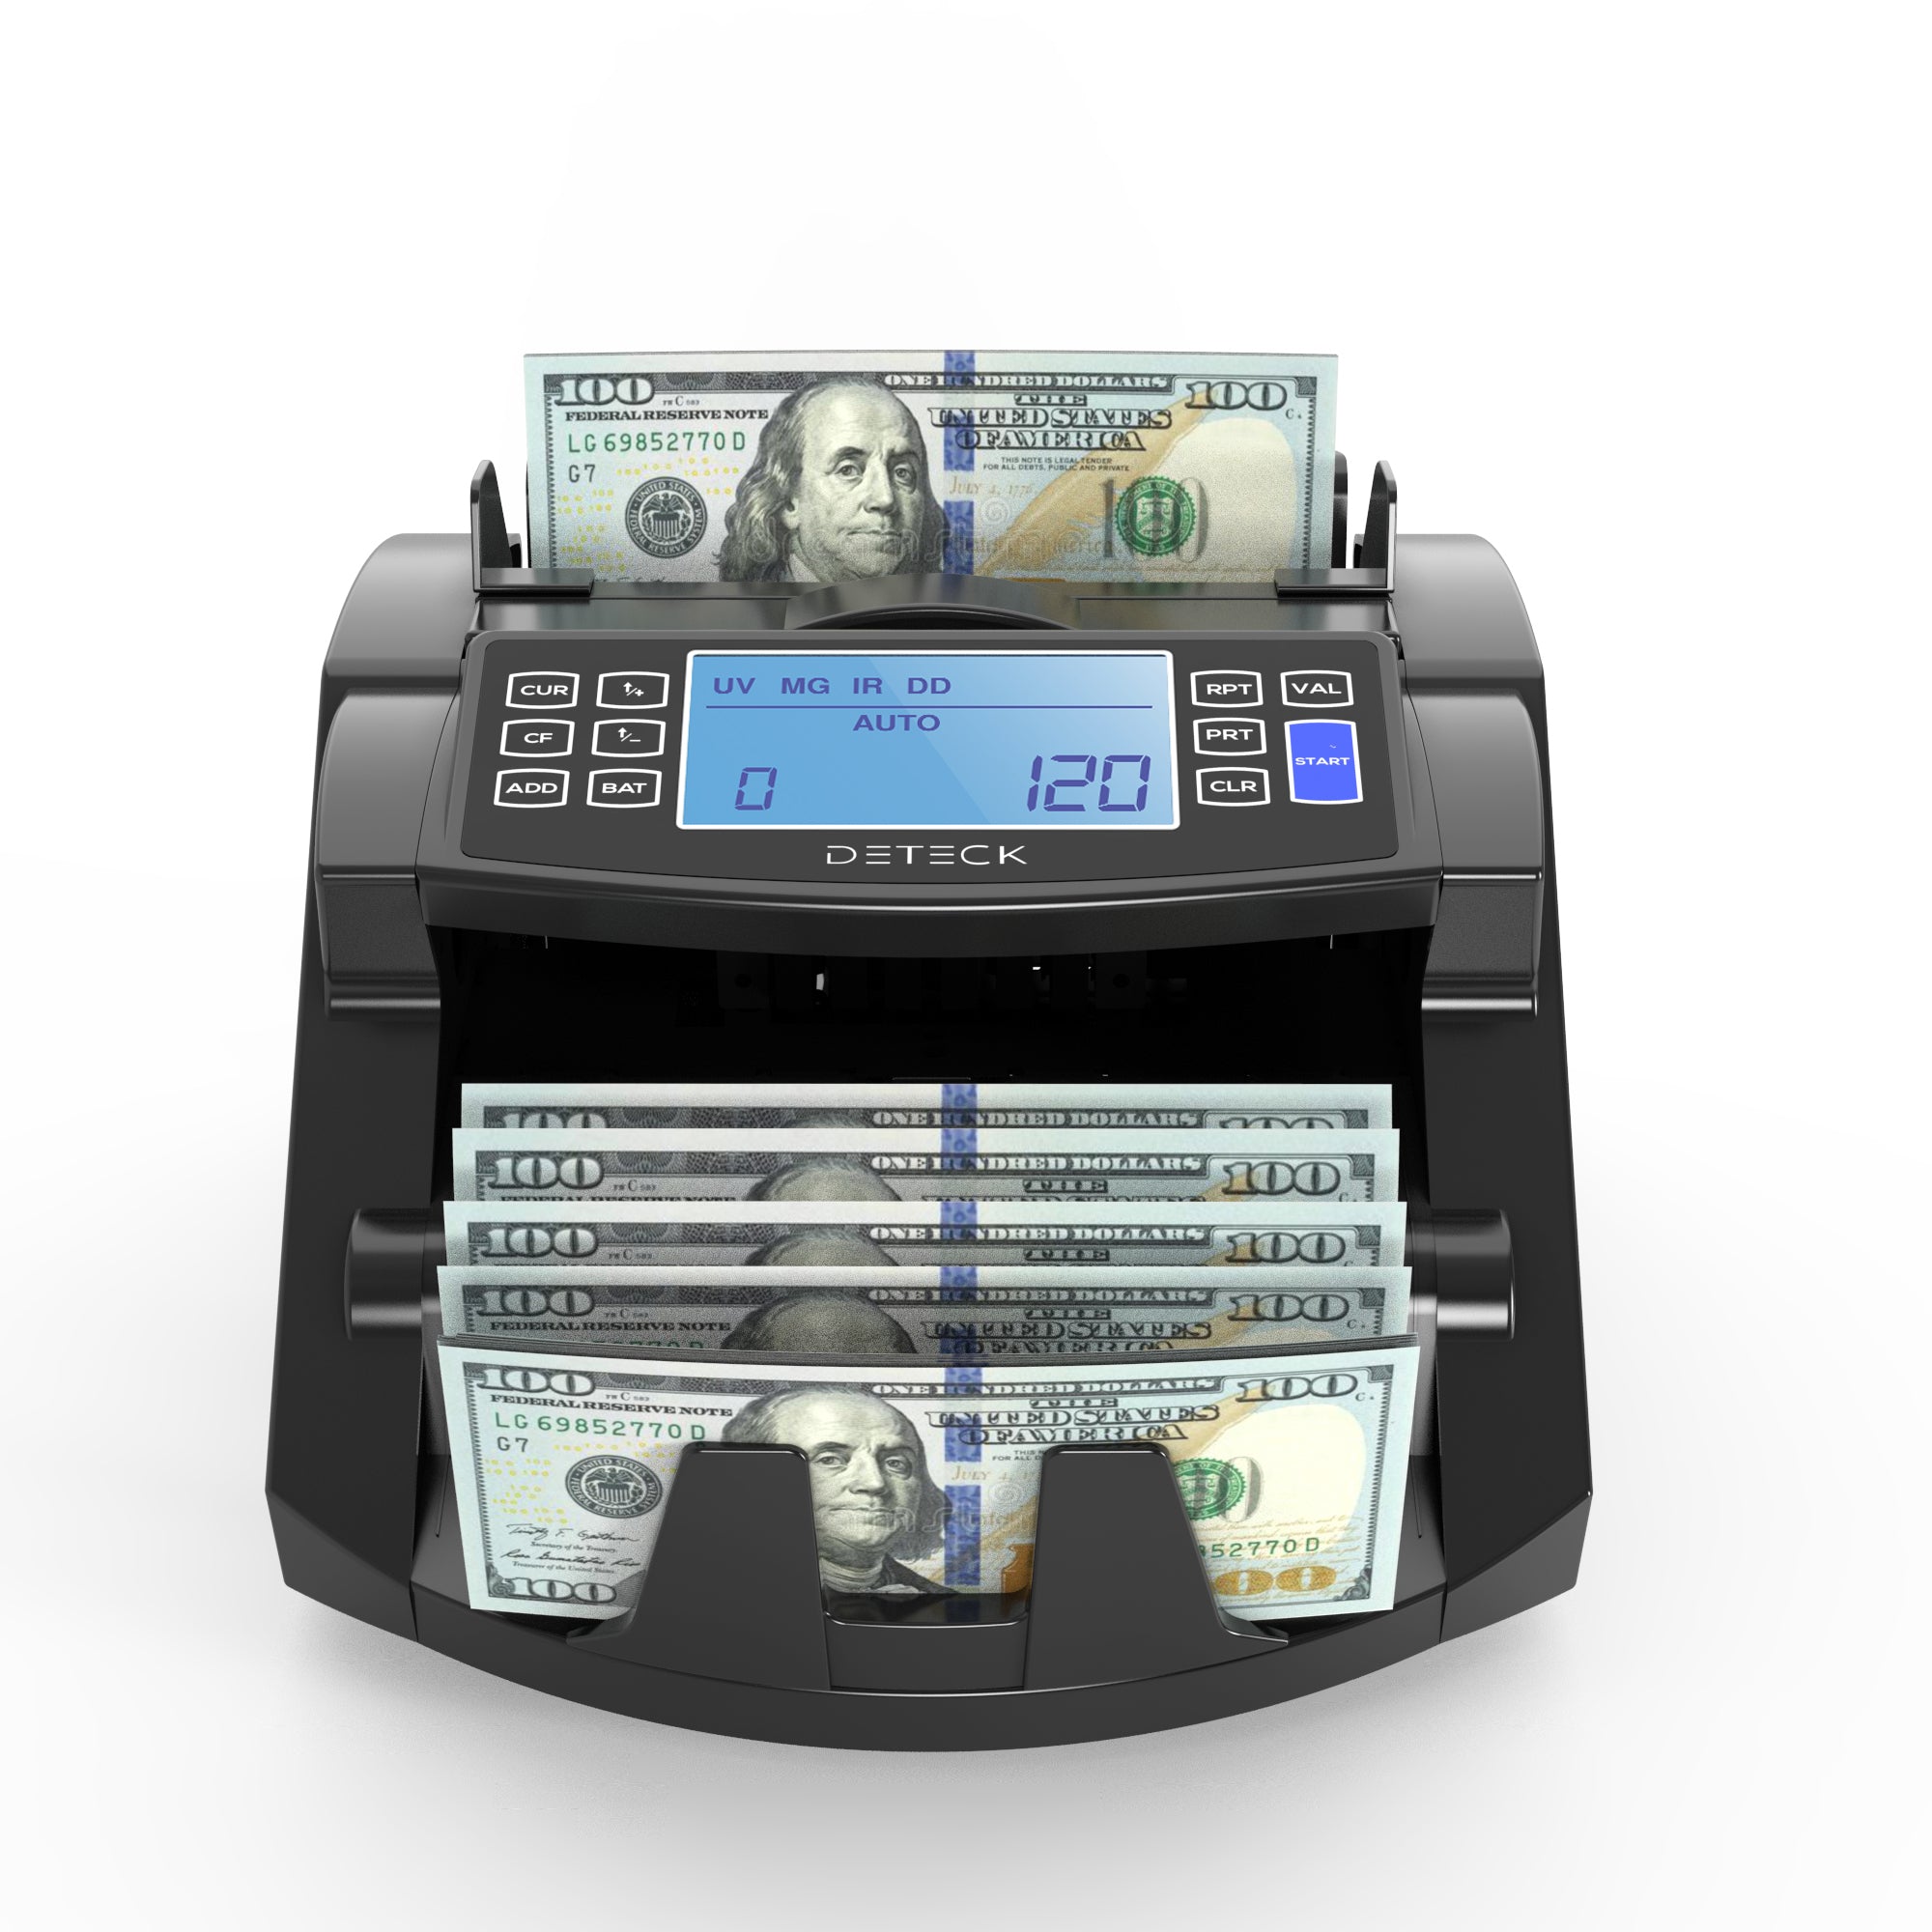 HAWK DT200 Money Counter Machine with Value Count